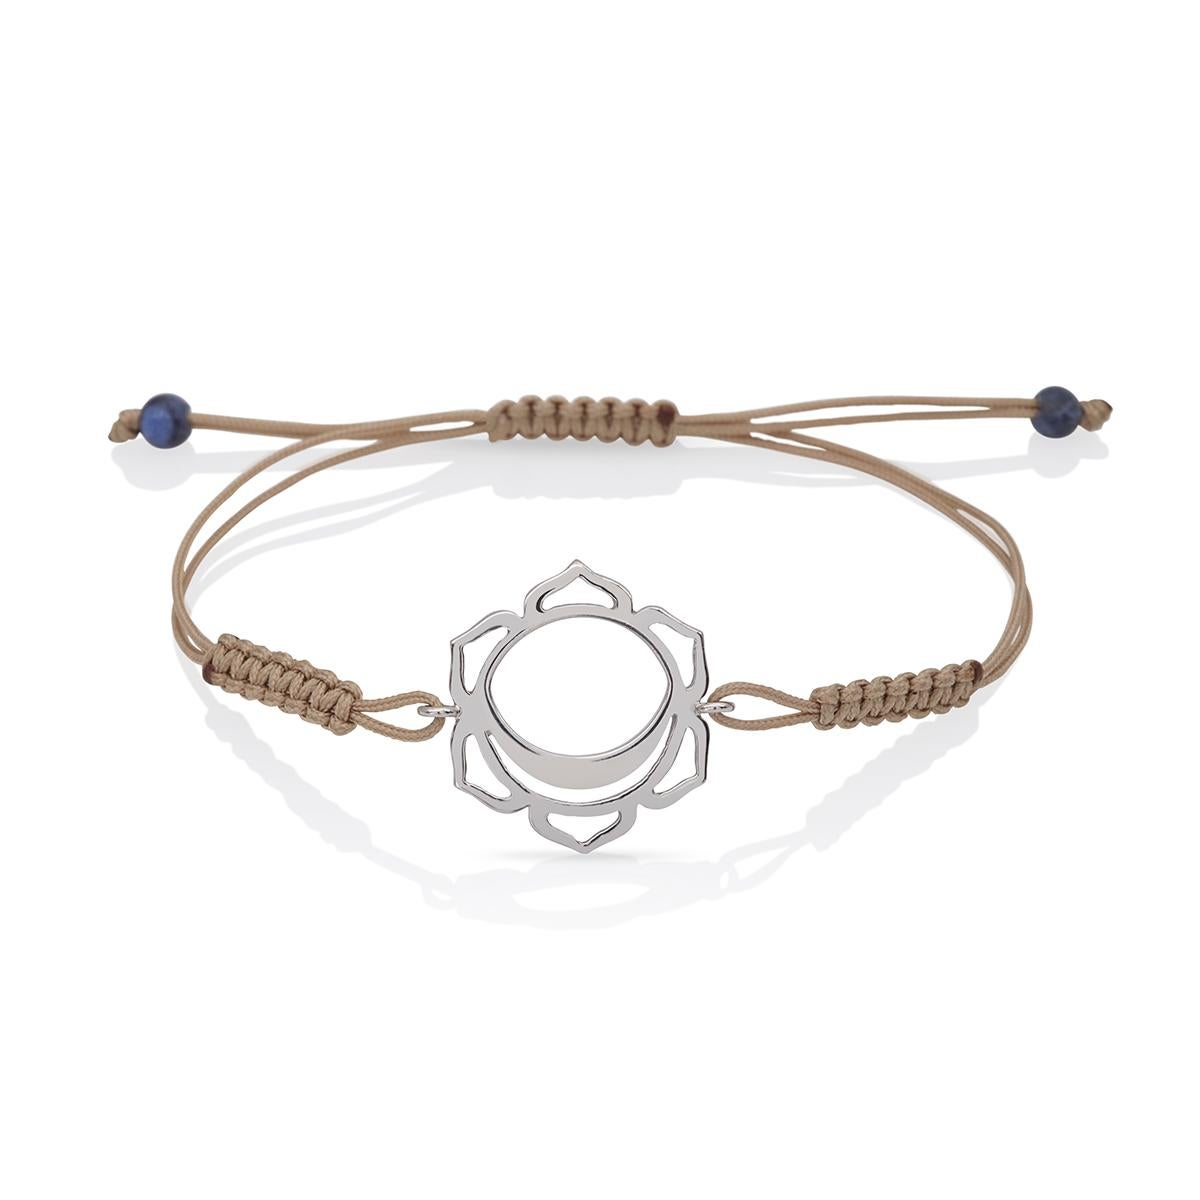 Macrame Yoga Bracelet with Svadhisthana the Sacral (Sex) Chakra in 14Kt White Gold, Brown Cord and Lapis Lazuli beads
A very beautiful and wearable macrame bracelet made of 14Kt Gold with the Svadhisthana, the Sex Chakra. It will match with